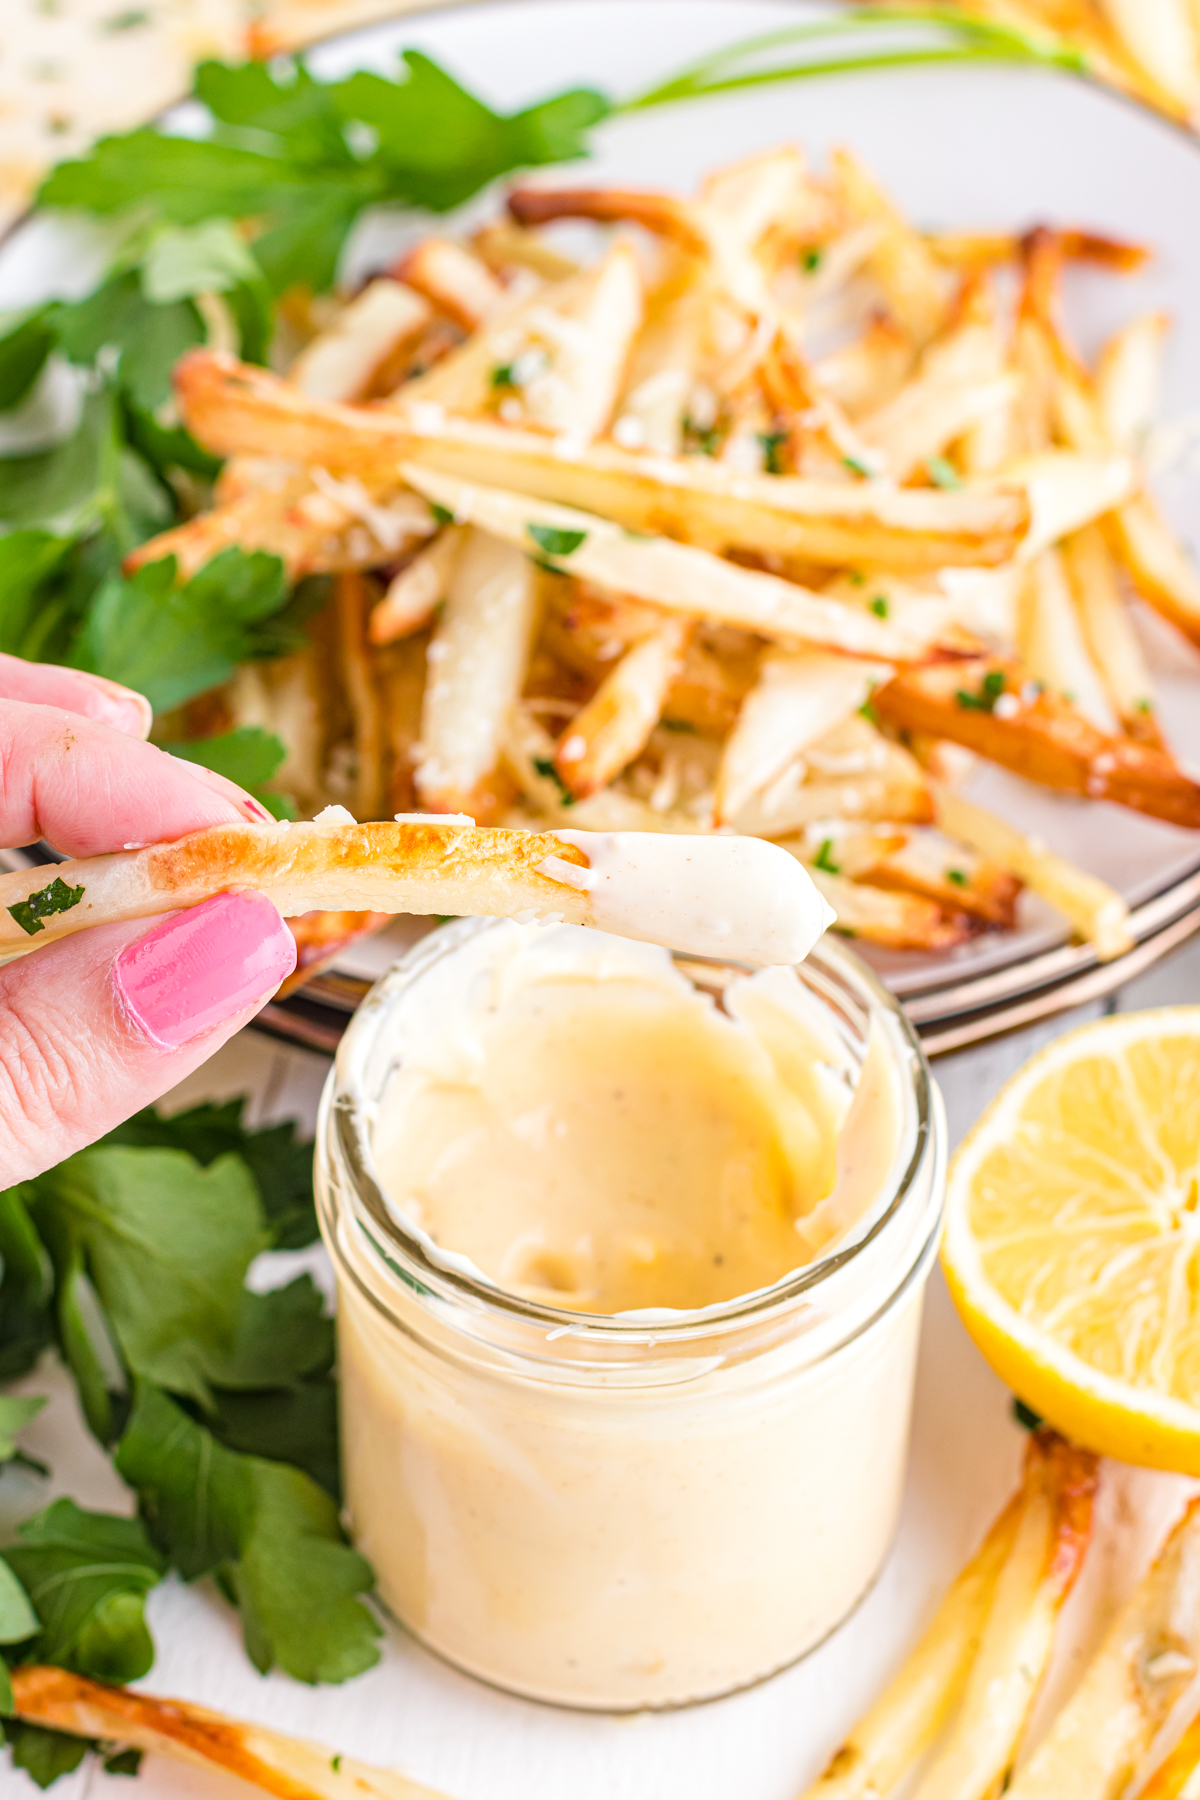 Dipping fries in aioli.